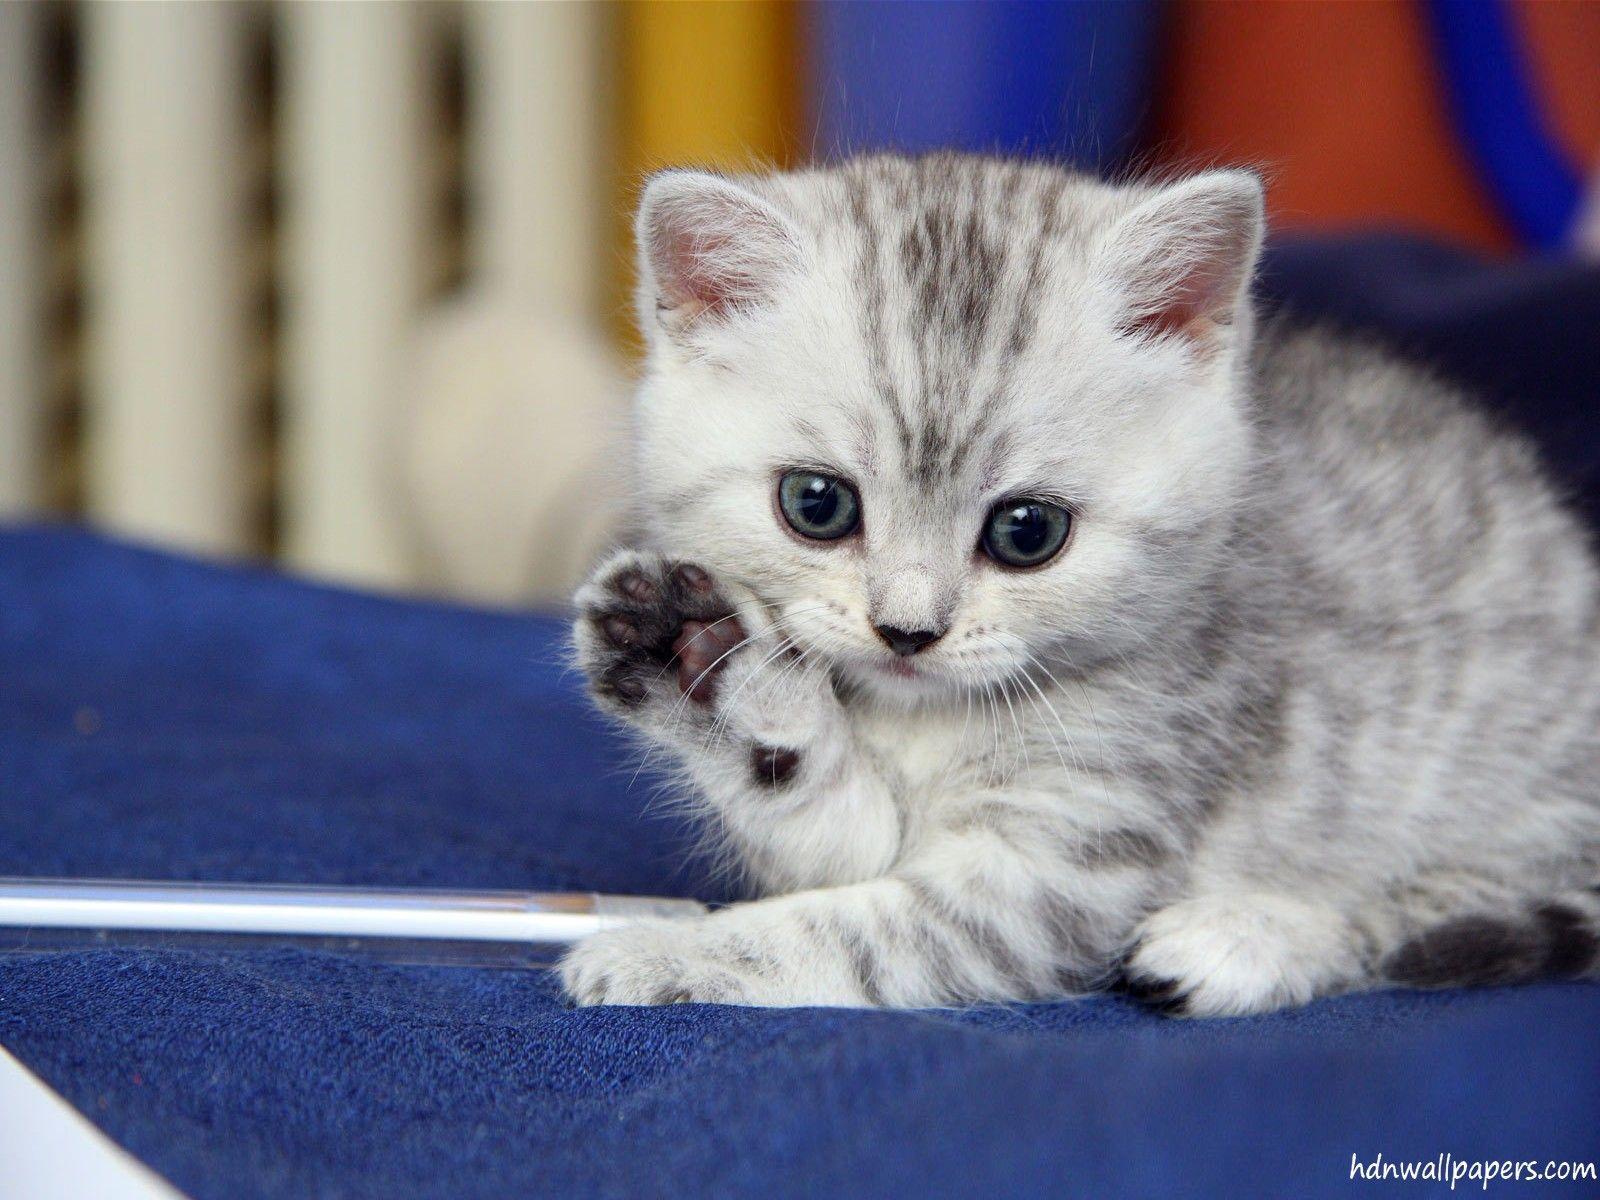 Cute Kittens Wallpapers For Mobile Wallpapers